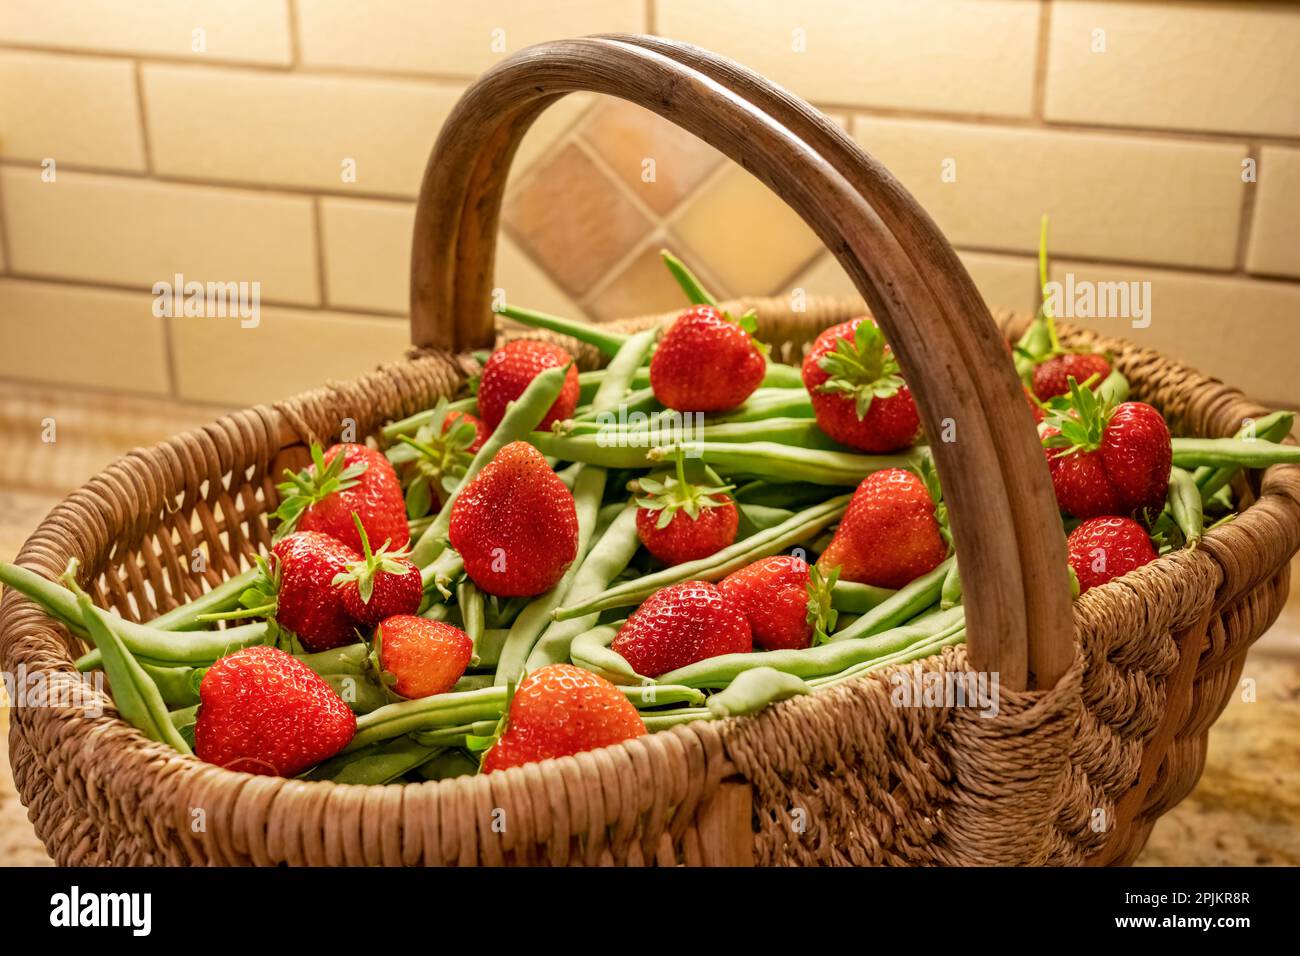 Issaquah, Washington State, USA. Woven basket of freshly harvested green beans and strawberries sitting on a granite kitchen countertop. Stock Photo